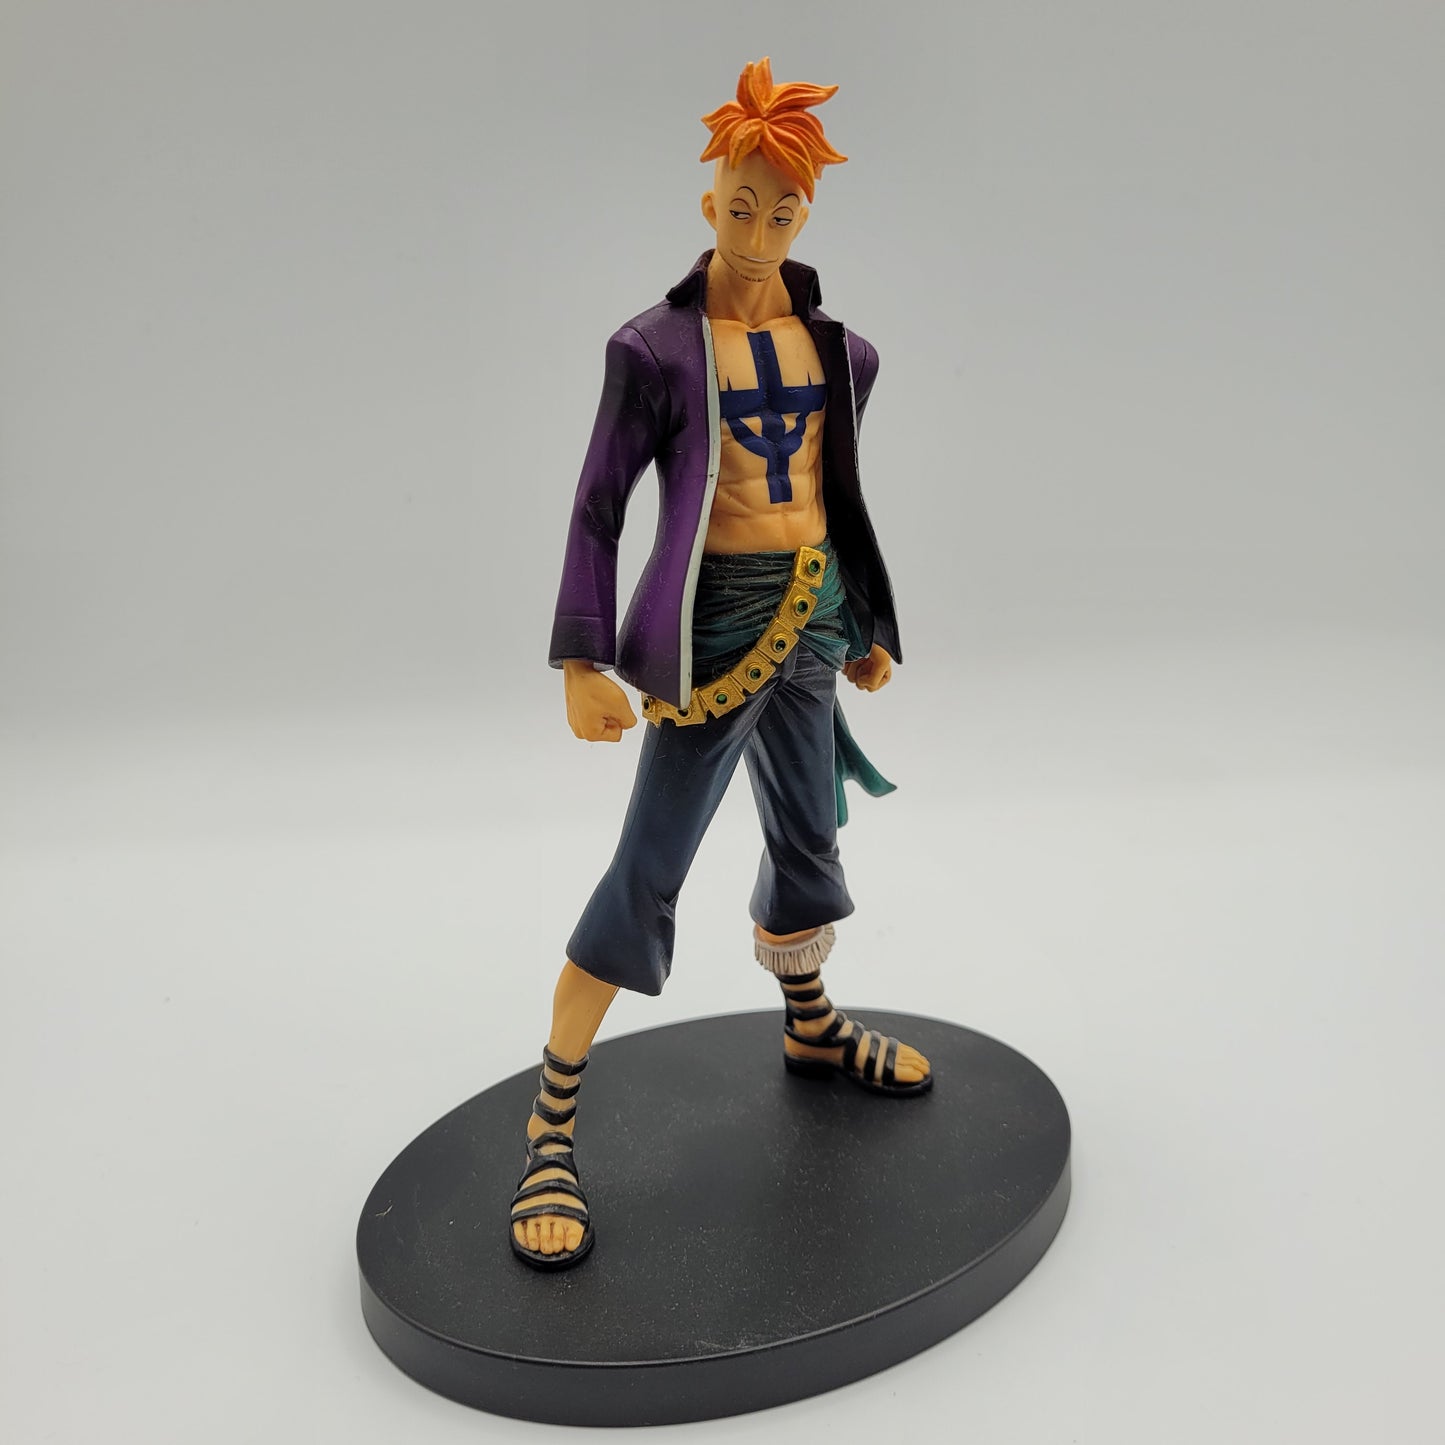 Occasion One Piece DXF The Grandline Men Wano Country (Vol. 18) Marco